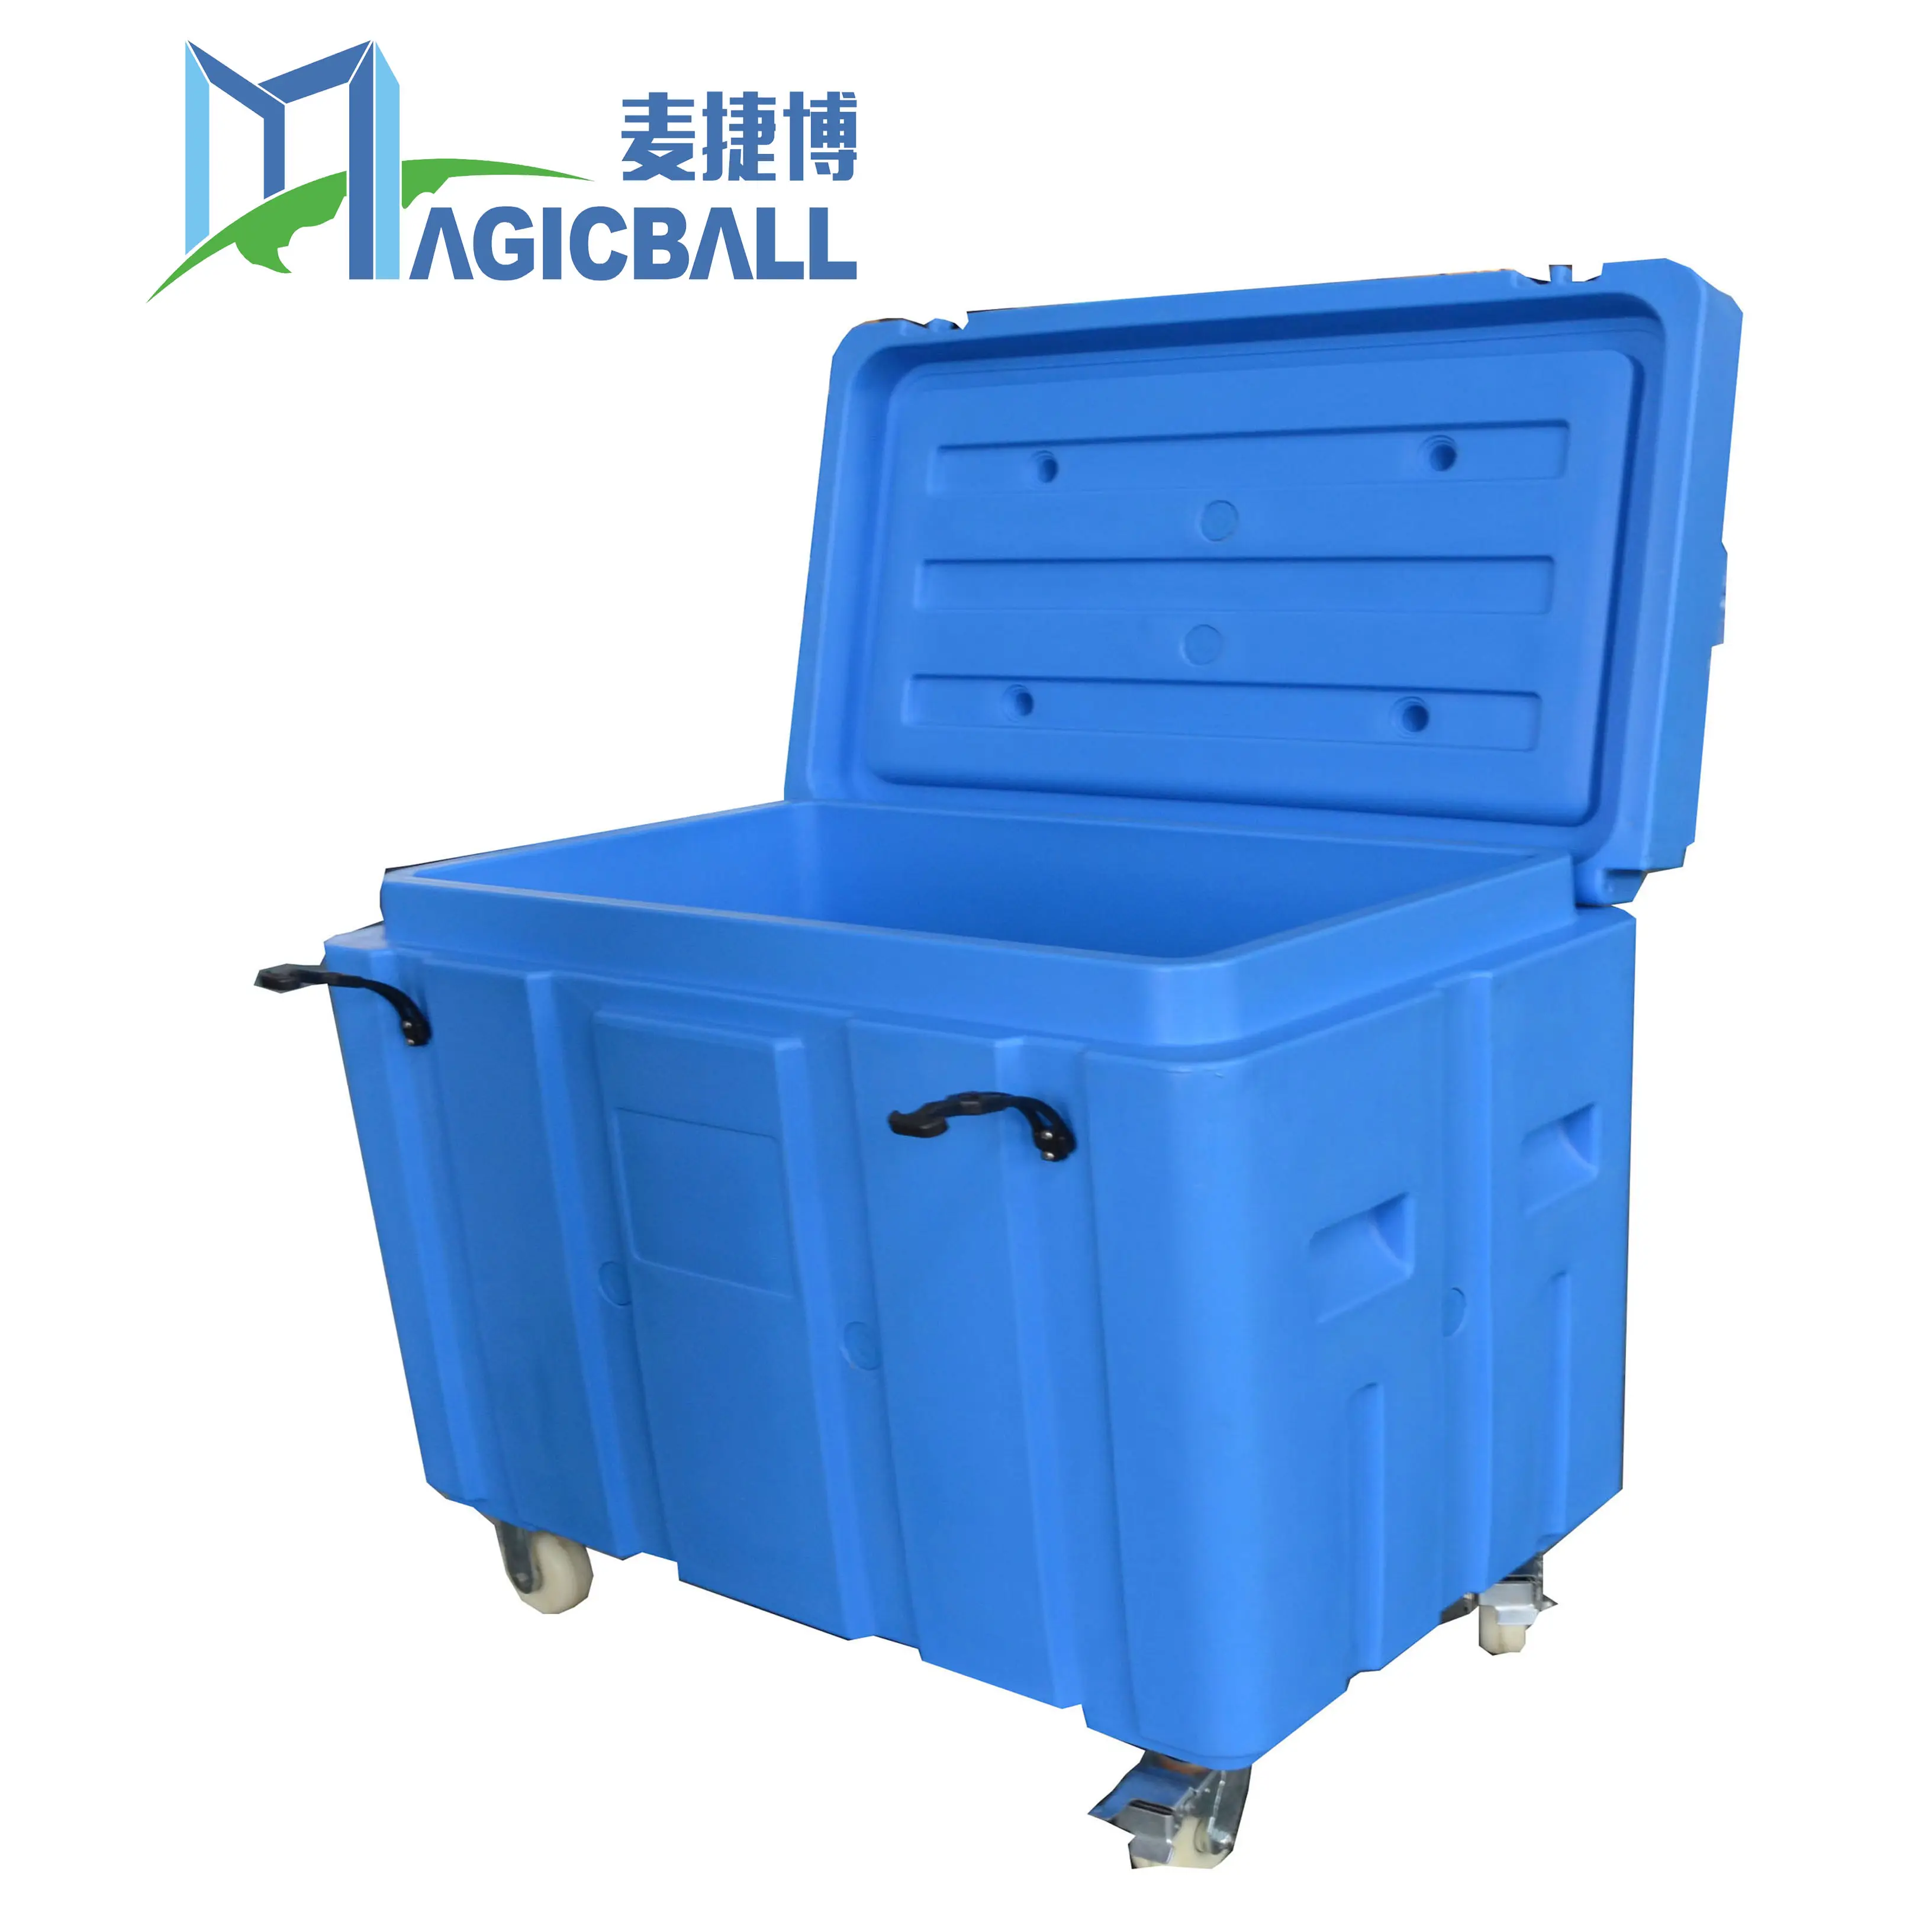 Insulated dry ice containers insulated totes for dryice/dry ice isothermal containers